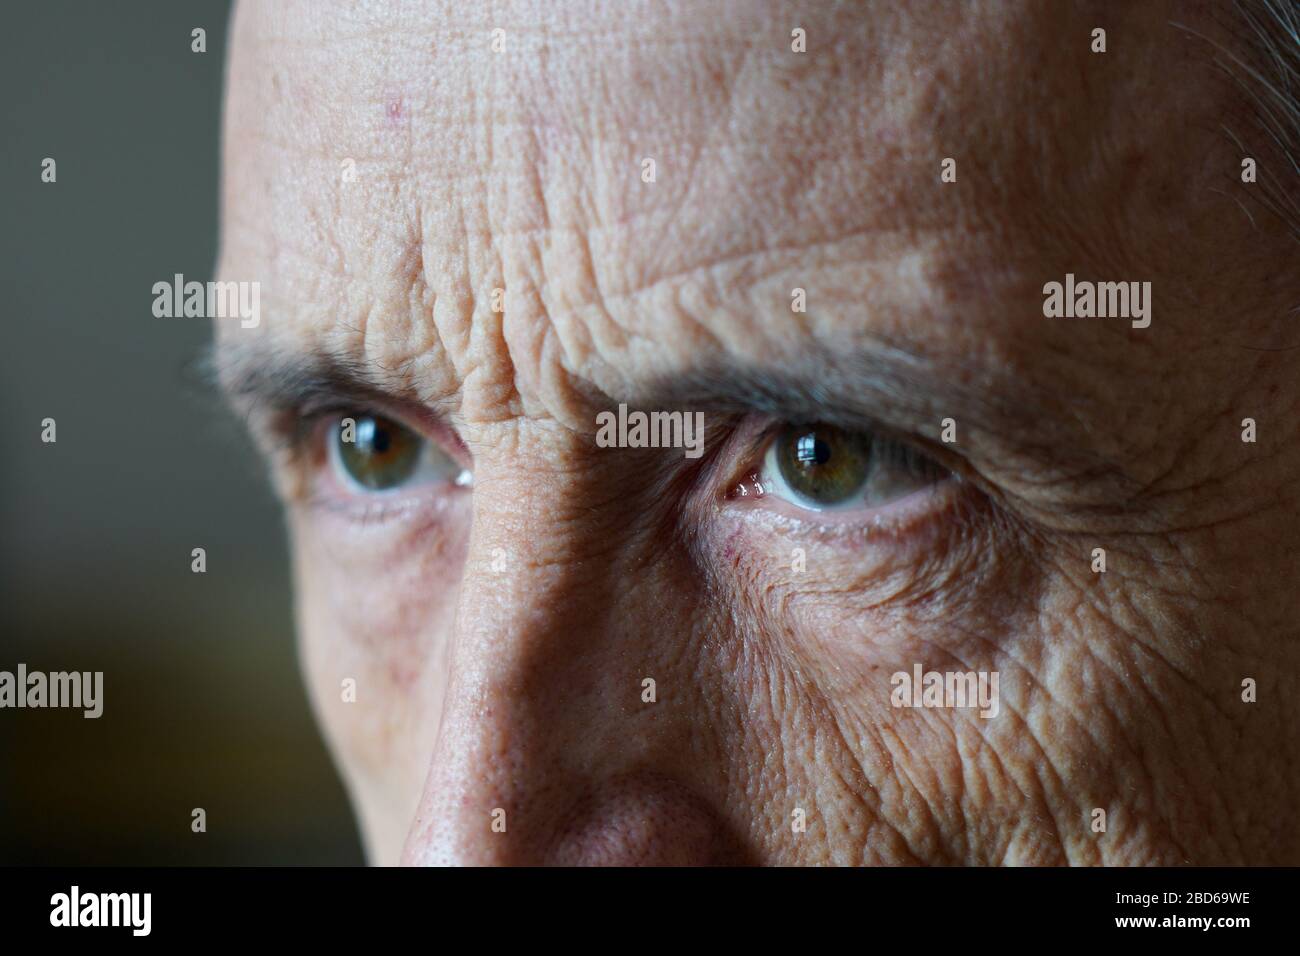 Eyes of a man close-up. A mature man frowns aside Stock Photo